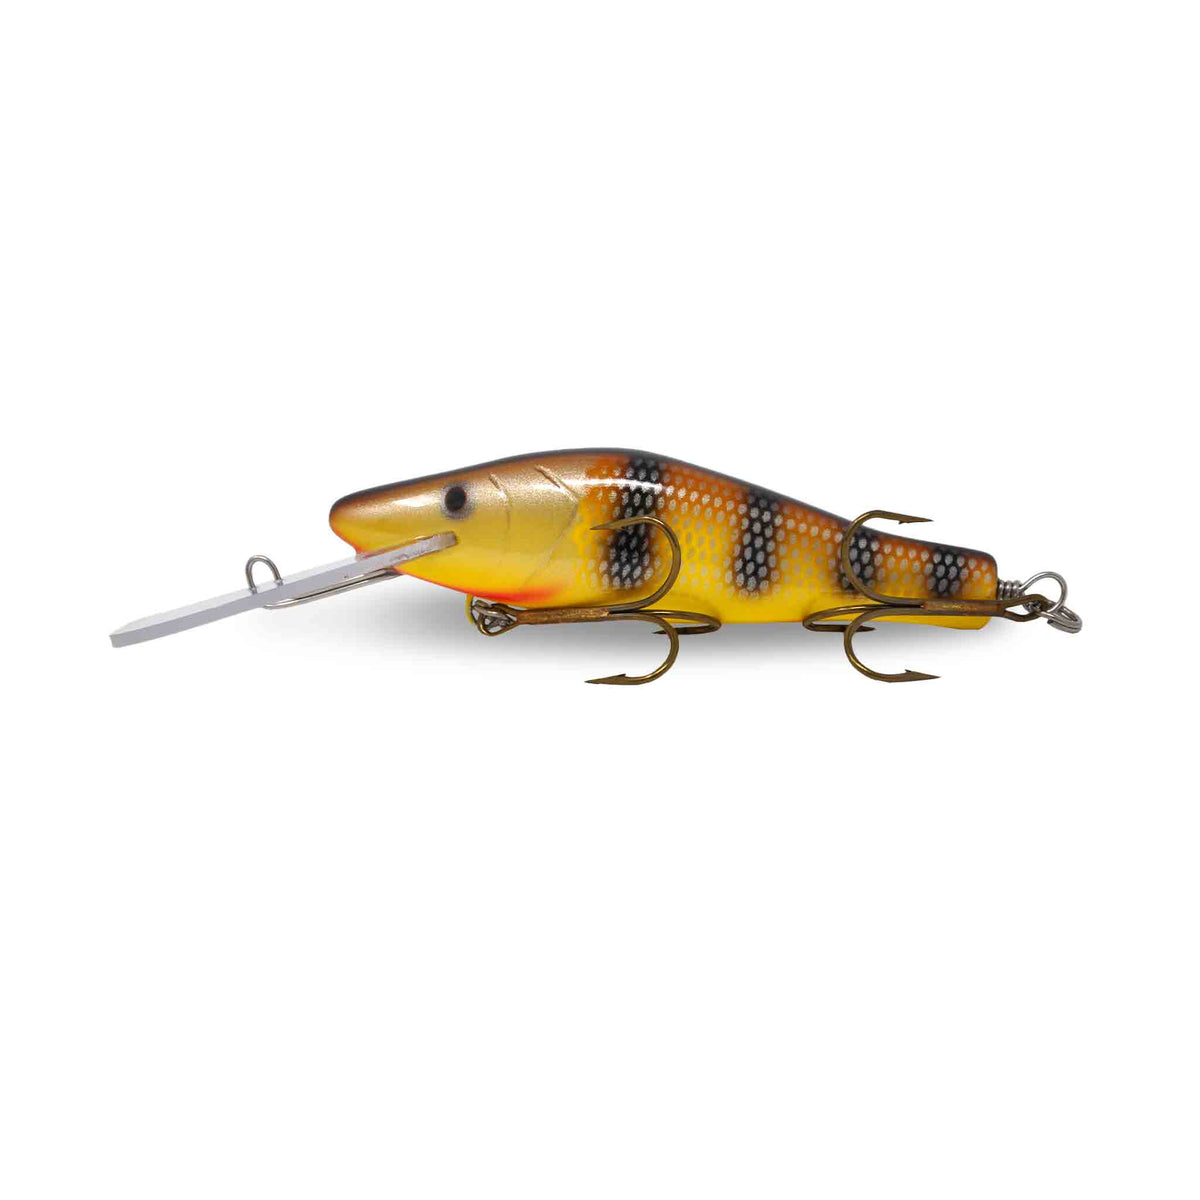 View of Crankbaits Legend lures Perch Bait Jr Crankbait Walleye available at EZOKO Pike and Musky Shop